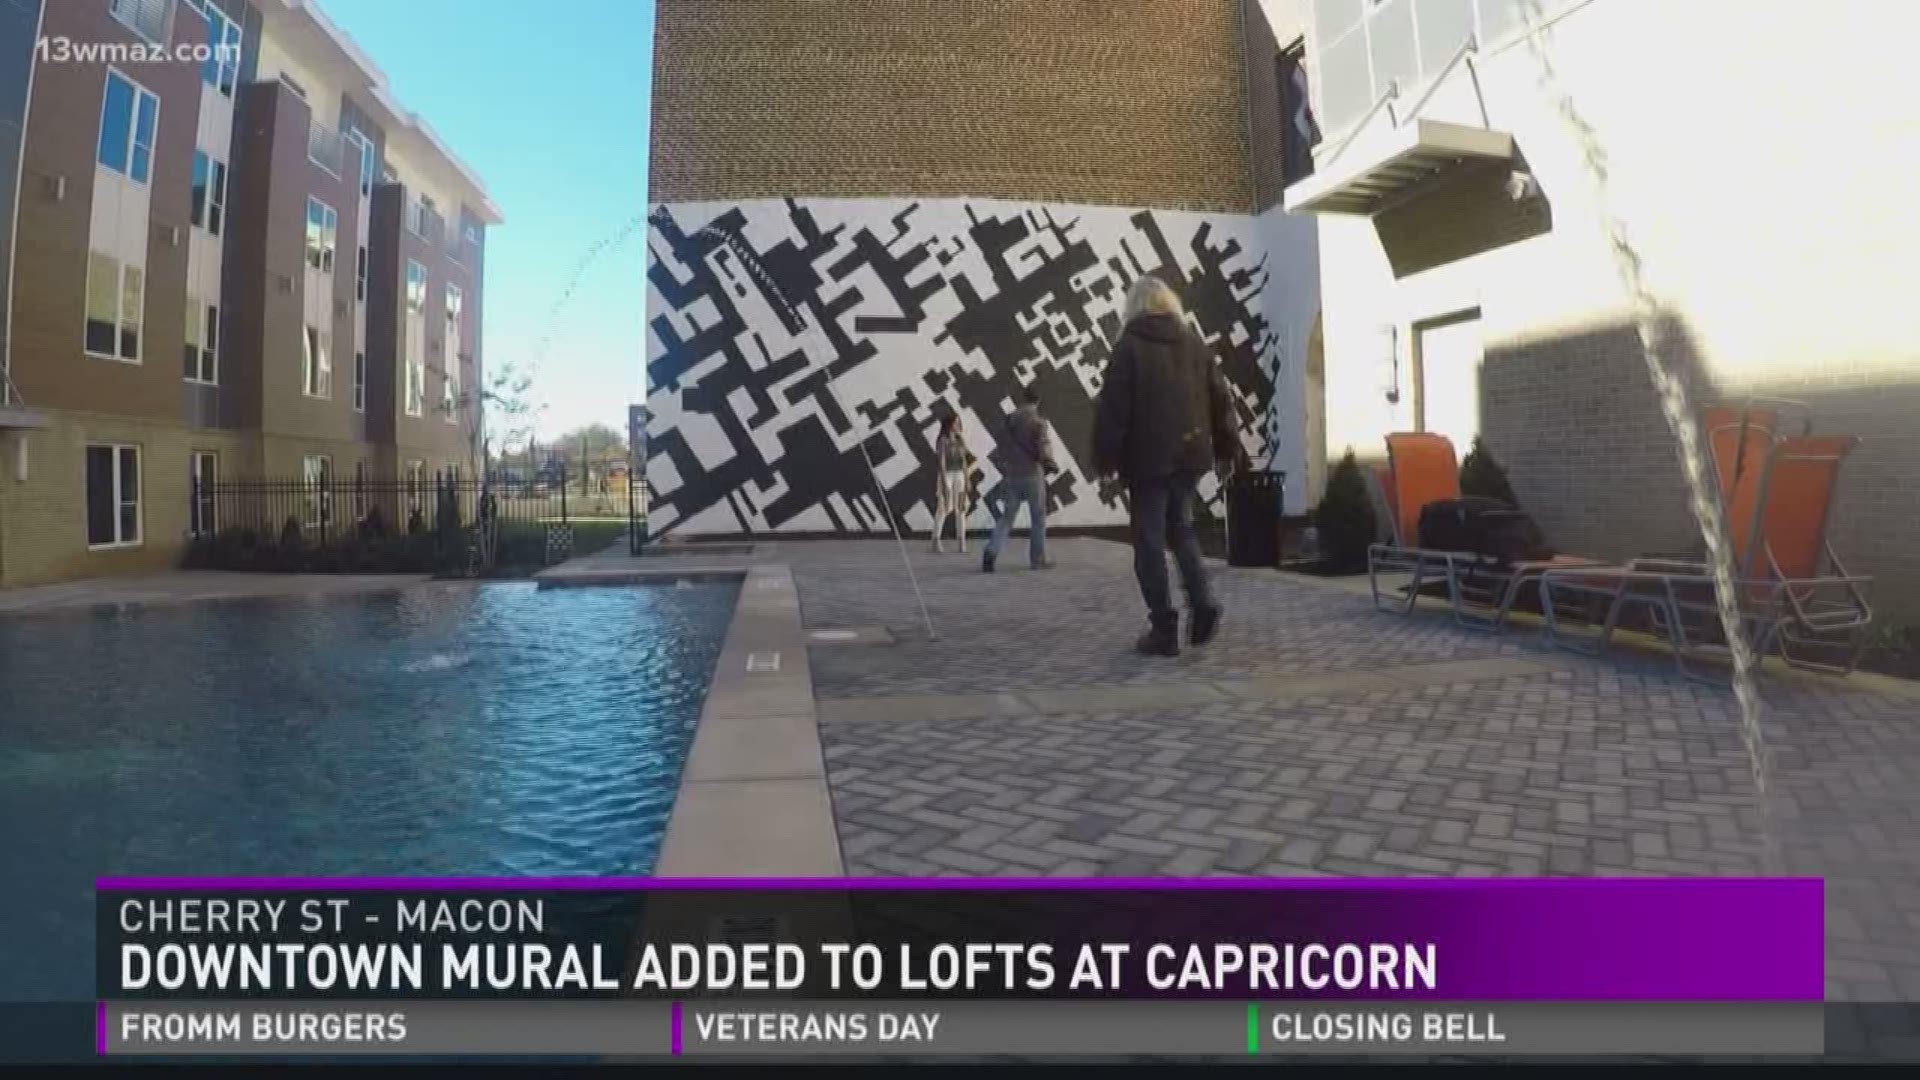 Downtown mural added to lofts at Capricorn